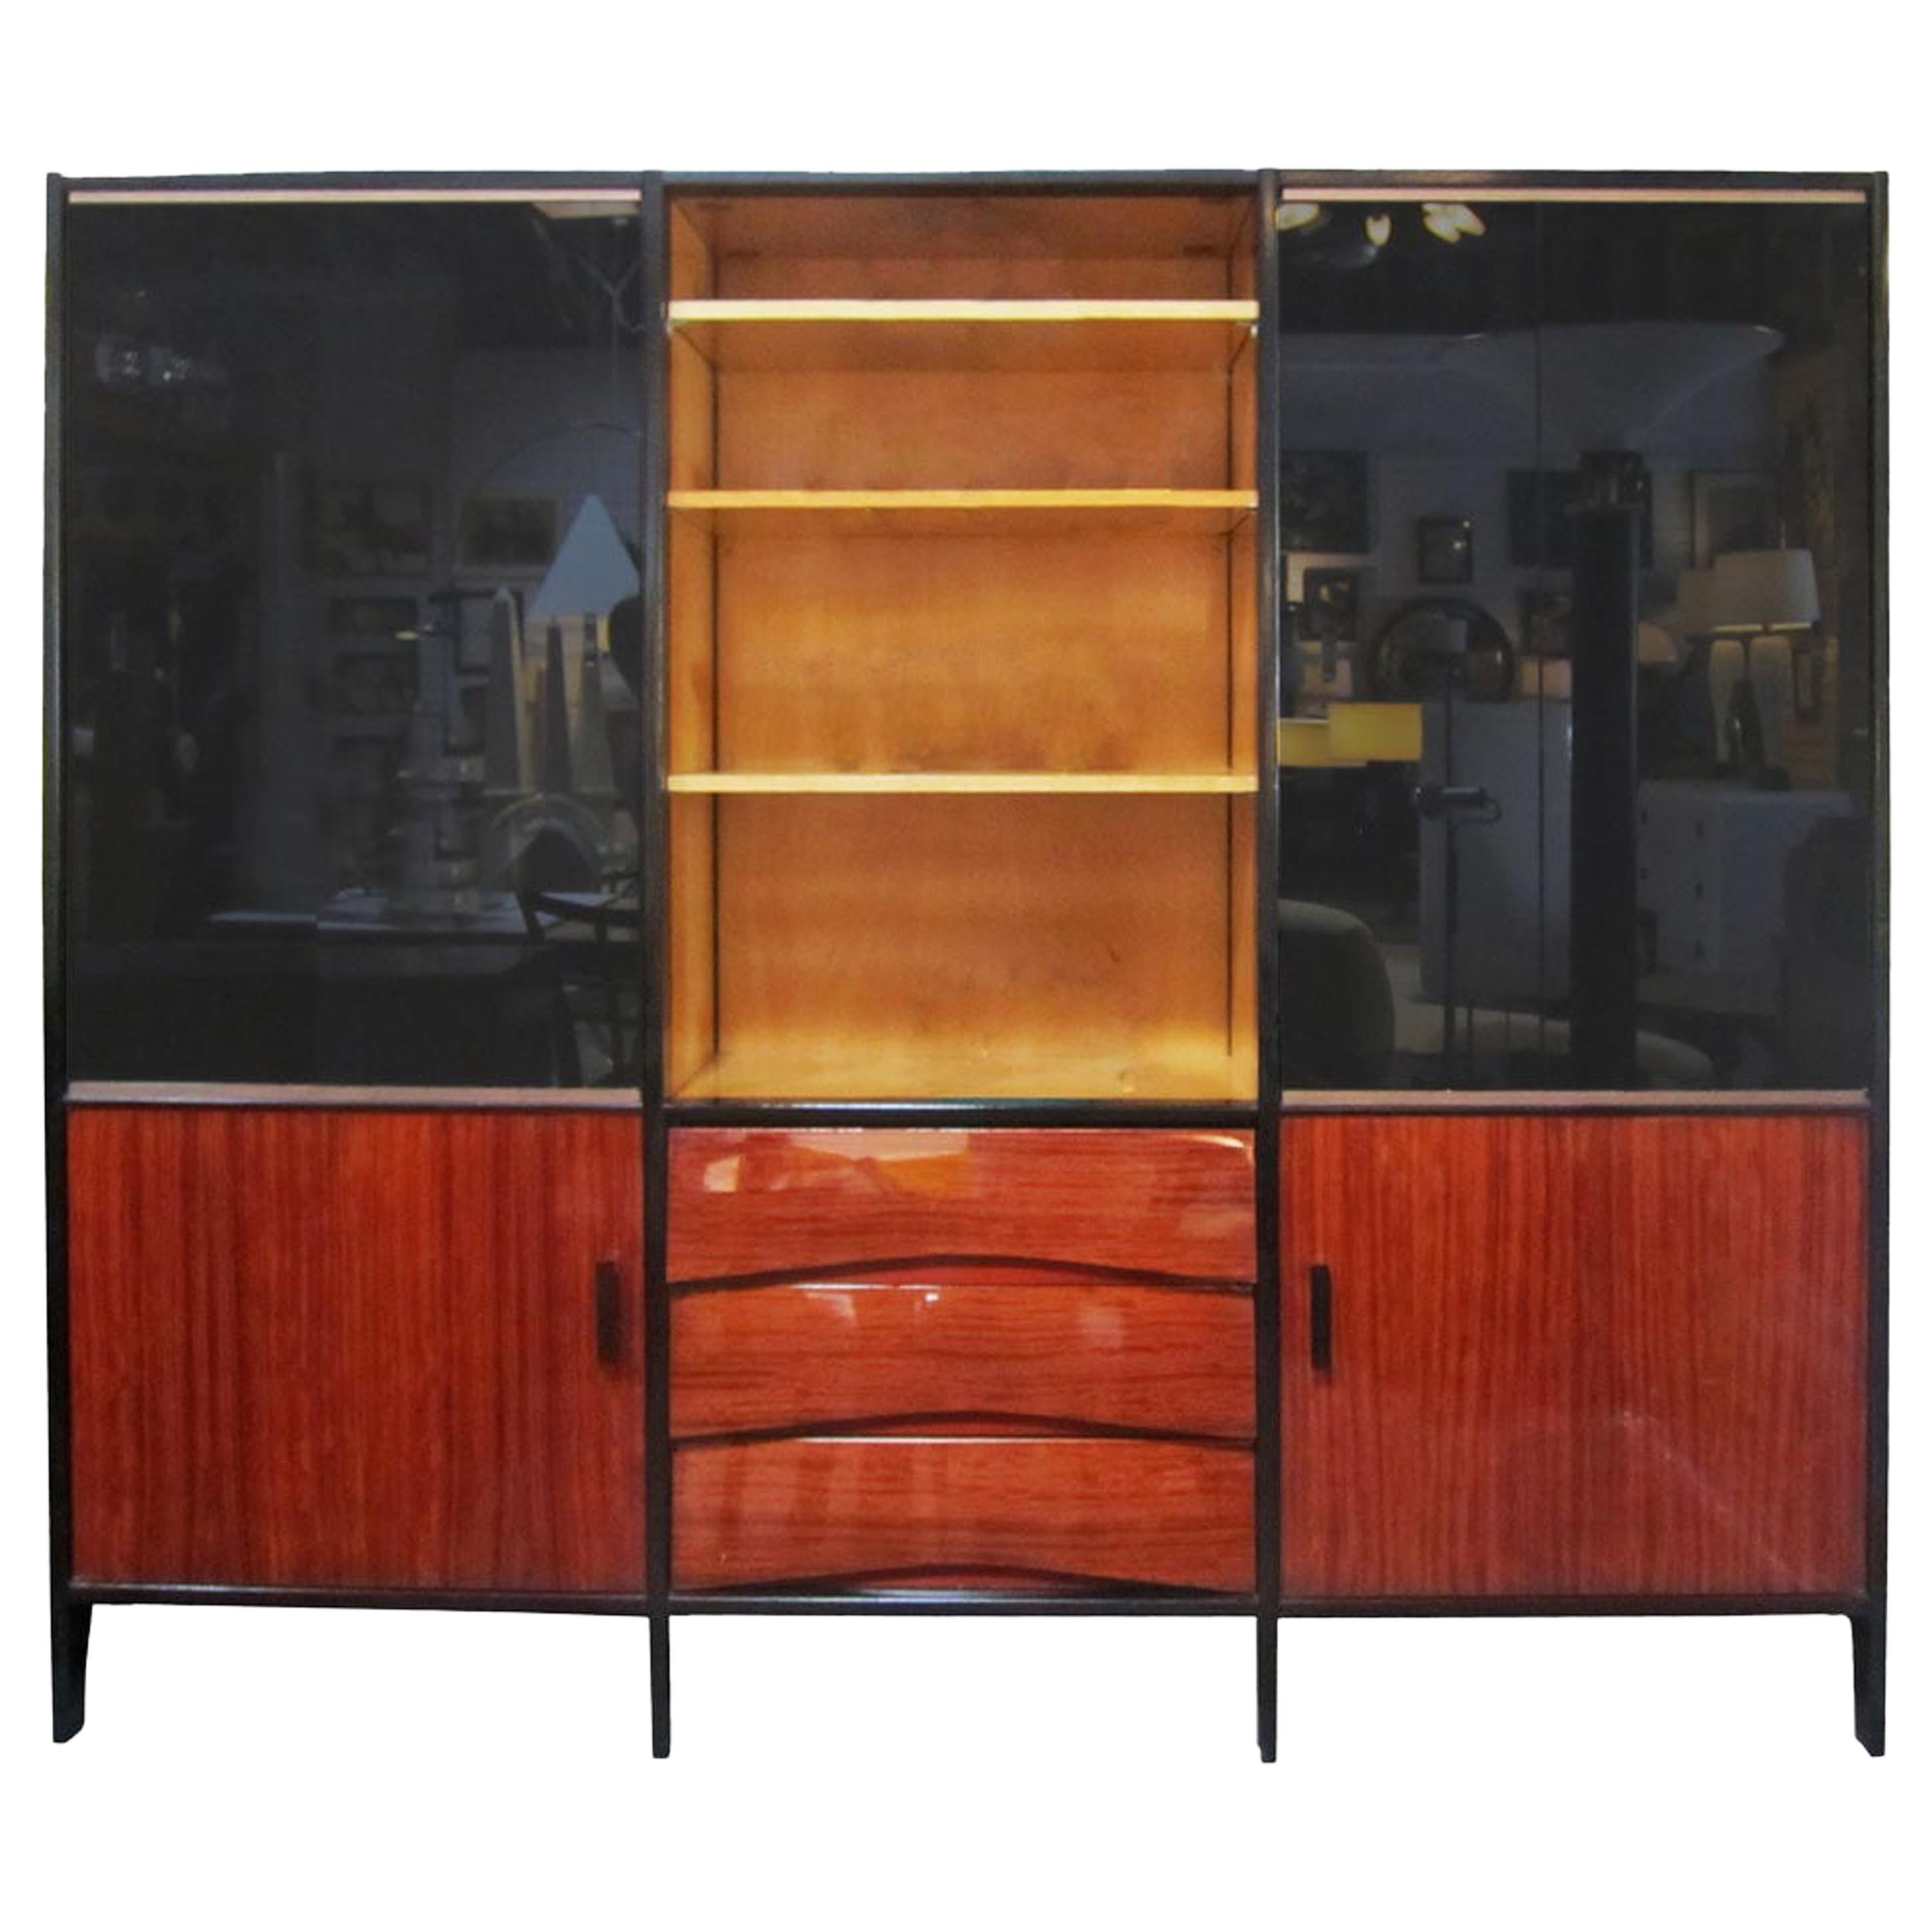 Midcentury French Bookshelf in Mahogany by Meubles Minvielle